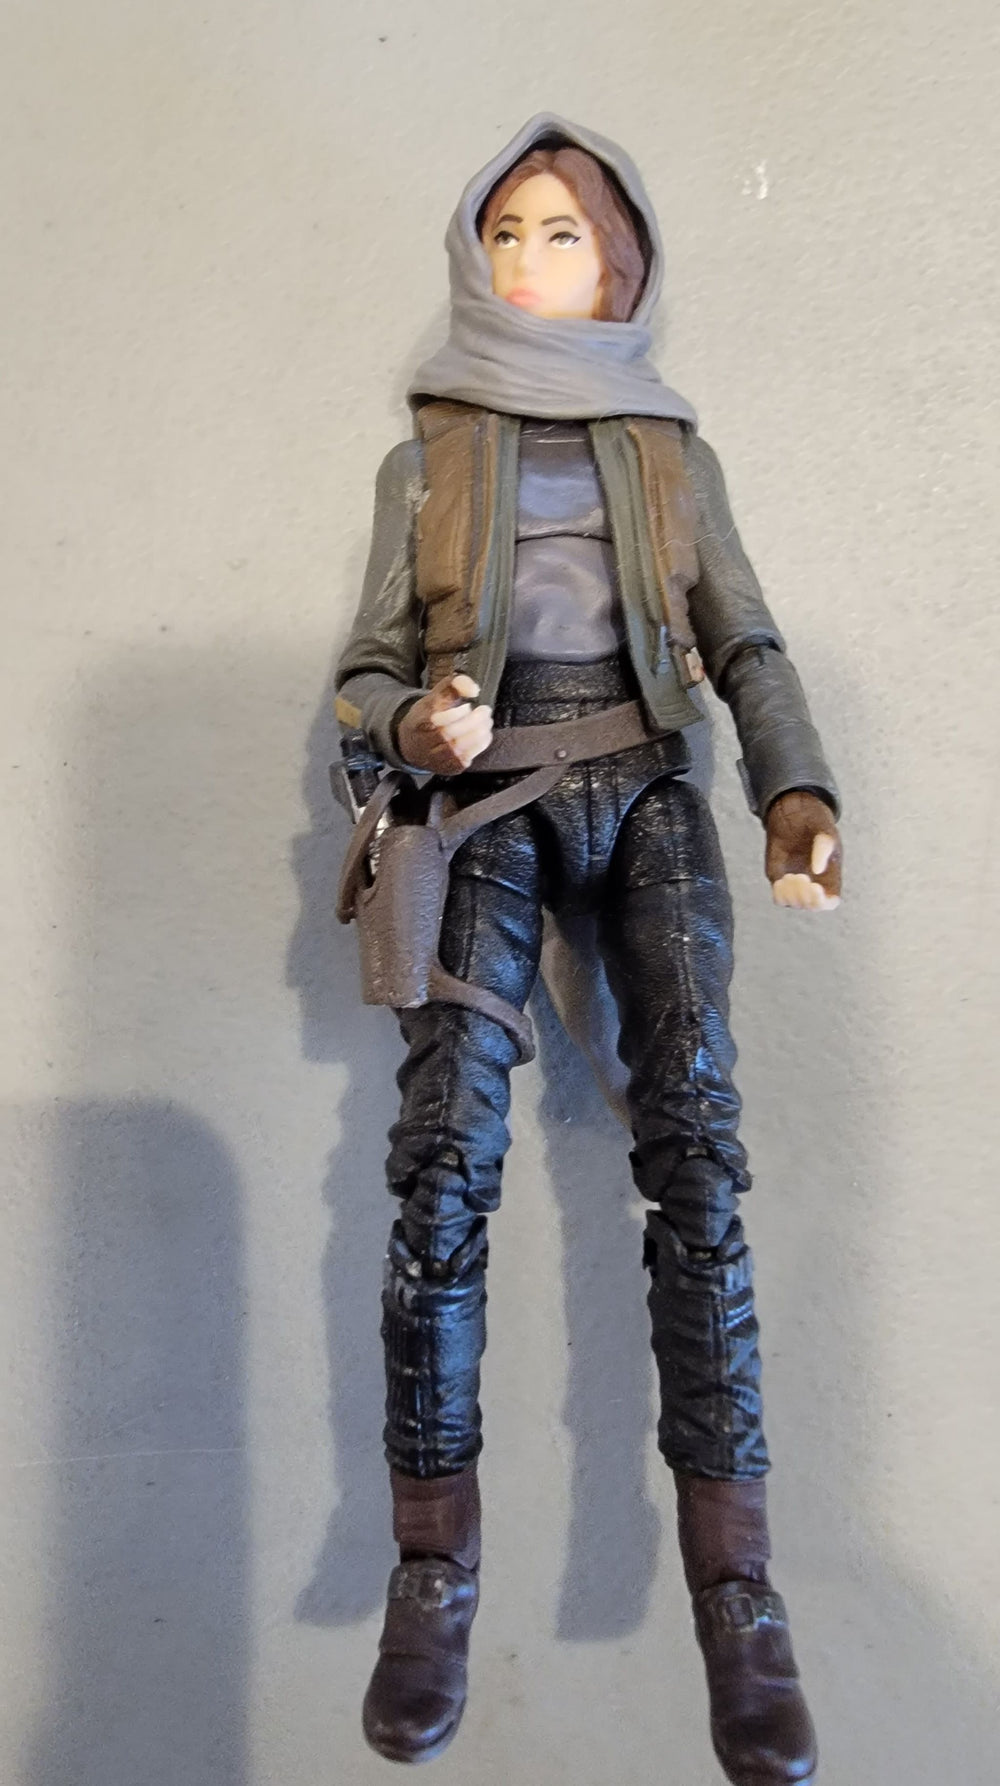 Star Wars The Black Series JYN ERSO 6-Inch Action Figure (LOOSE - As Shown)